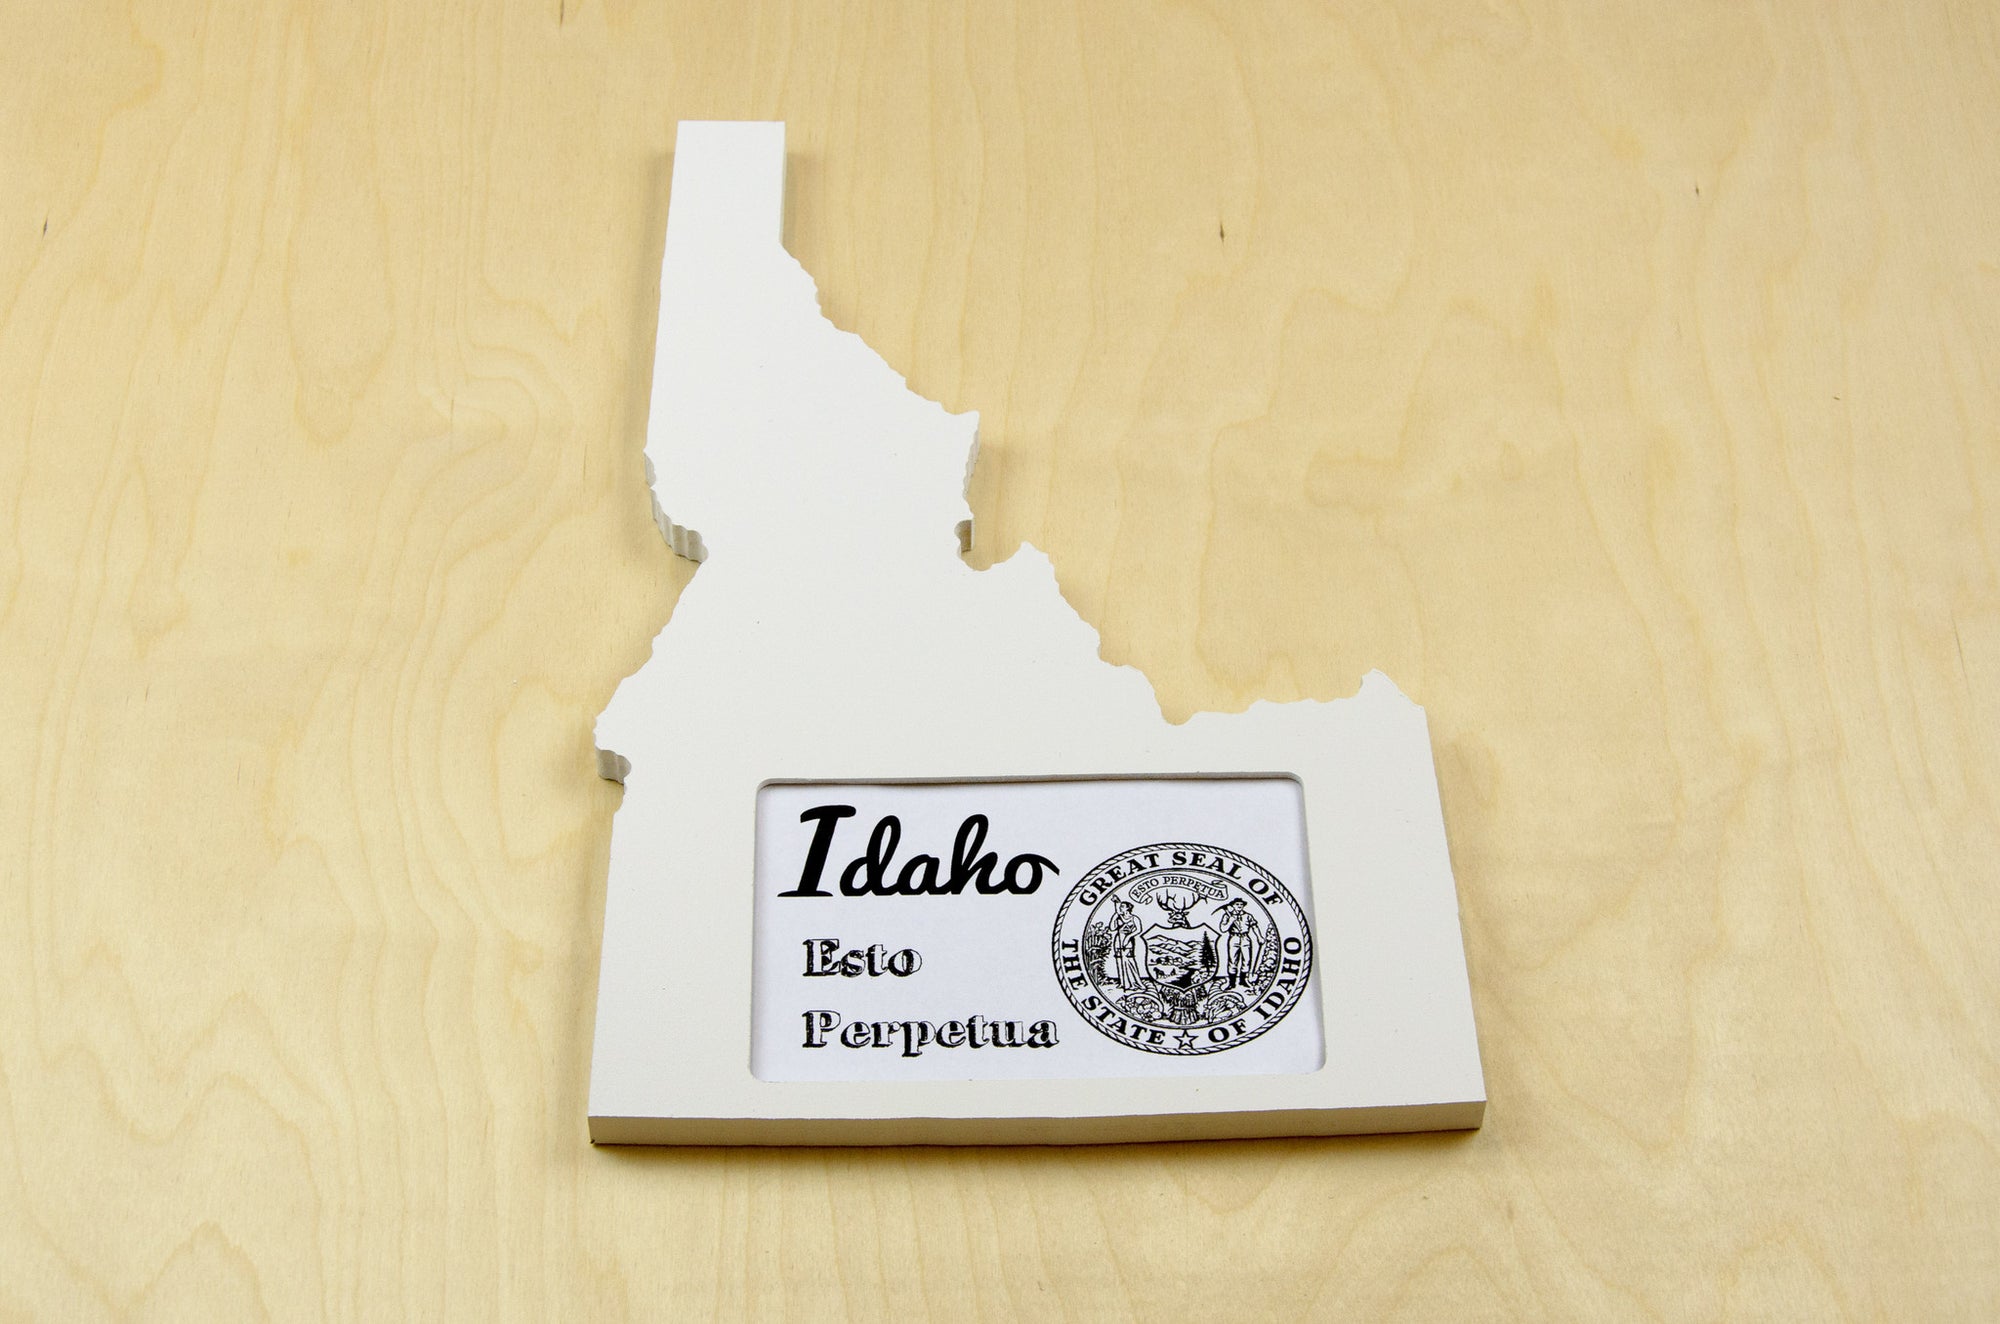 Idaho picture frame 4x6